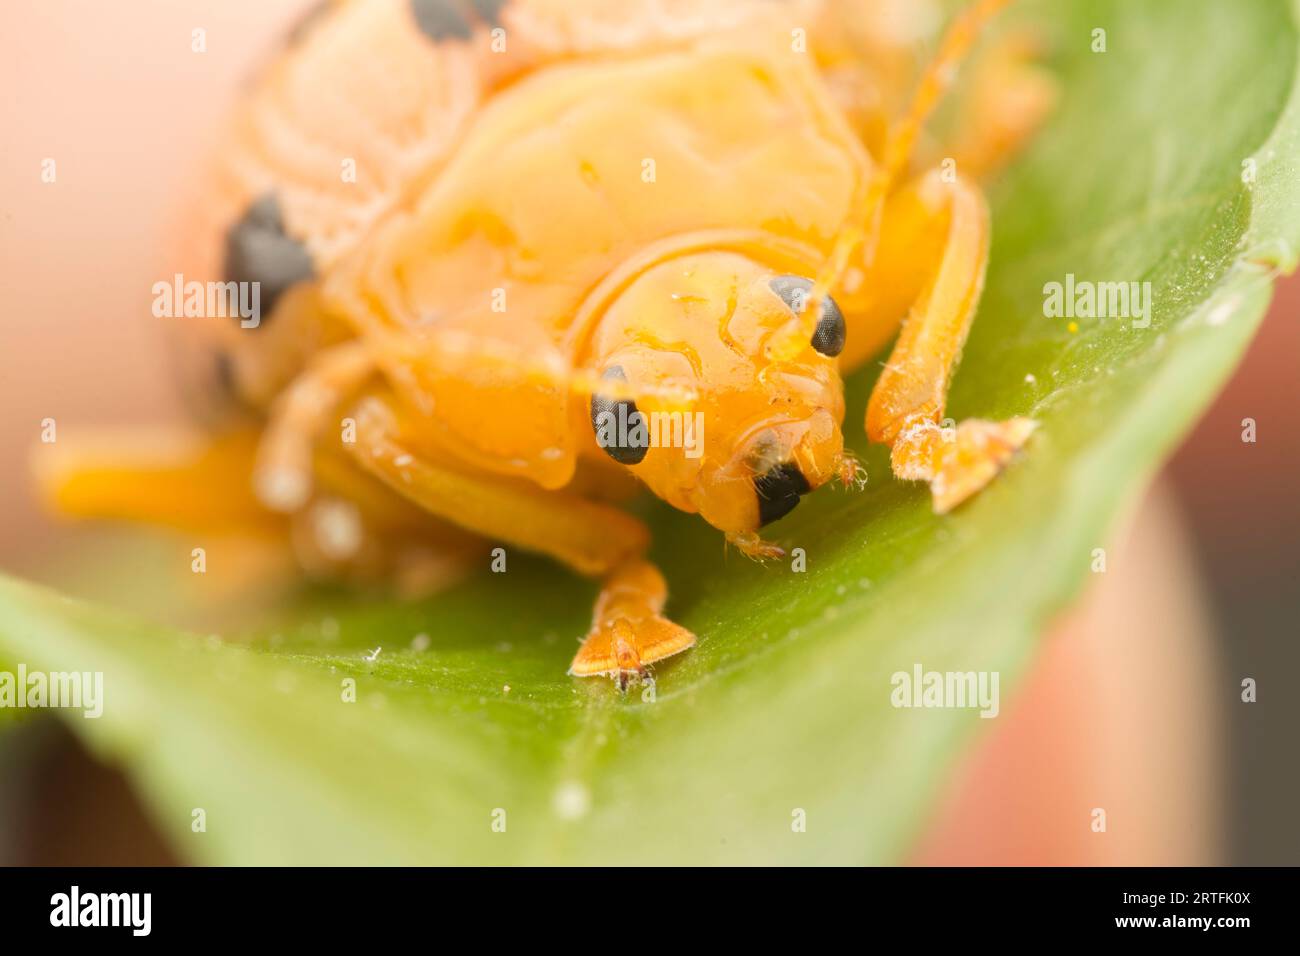 closeup shots of the life cycles of leaf beetle Stock Photo